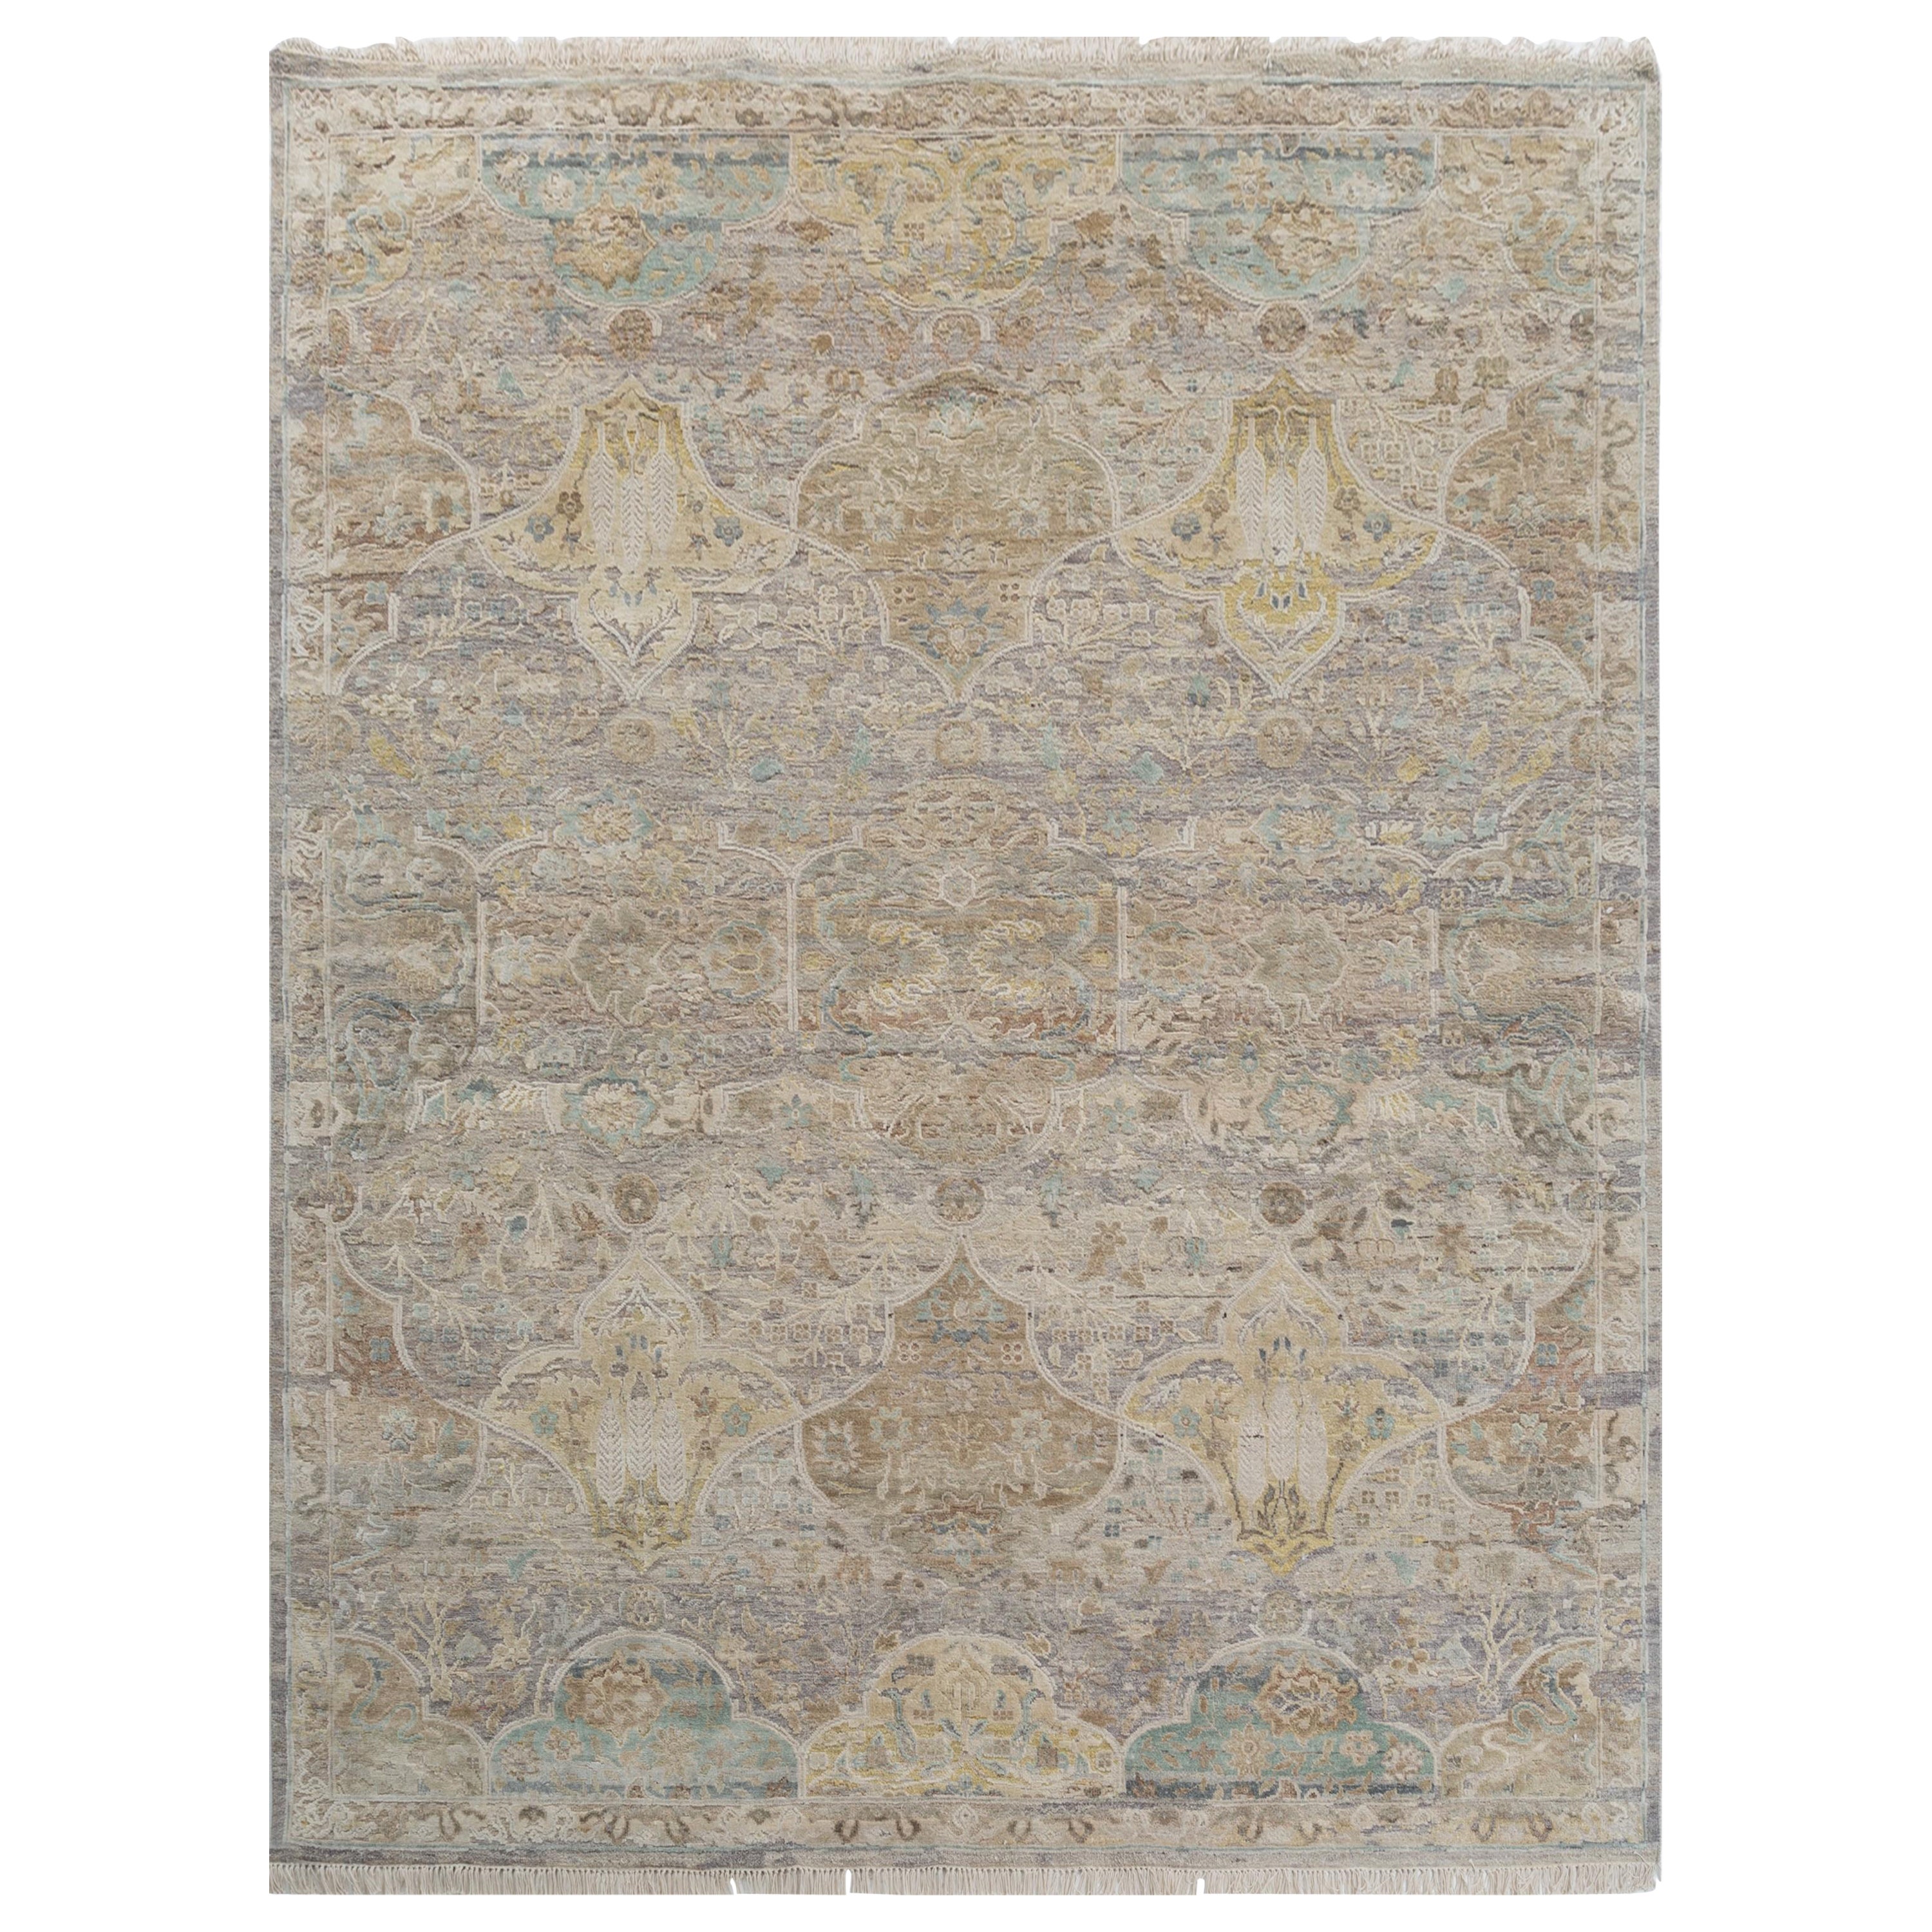 Timeless Medium Taupe Dark Ivory 180X270 Cm Hand-Knotted Rug For Sale